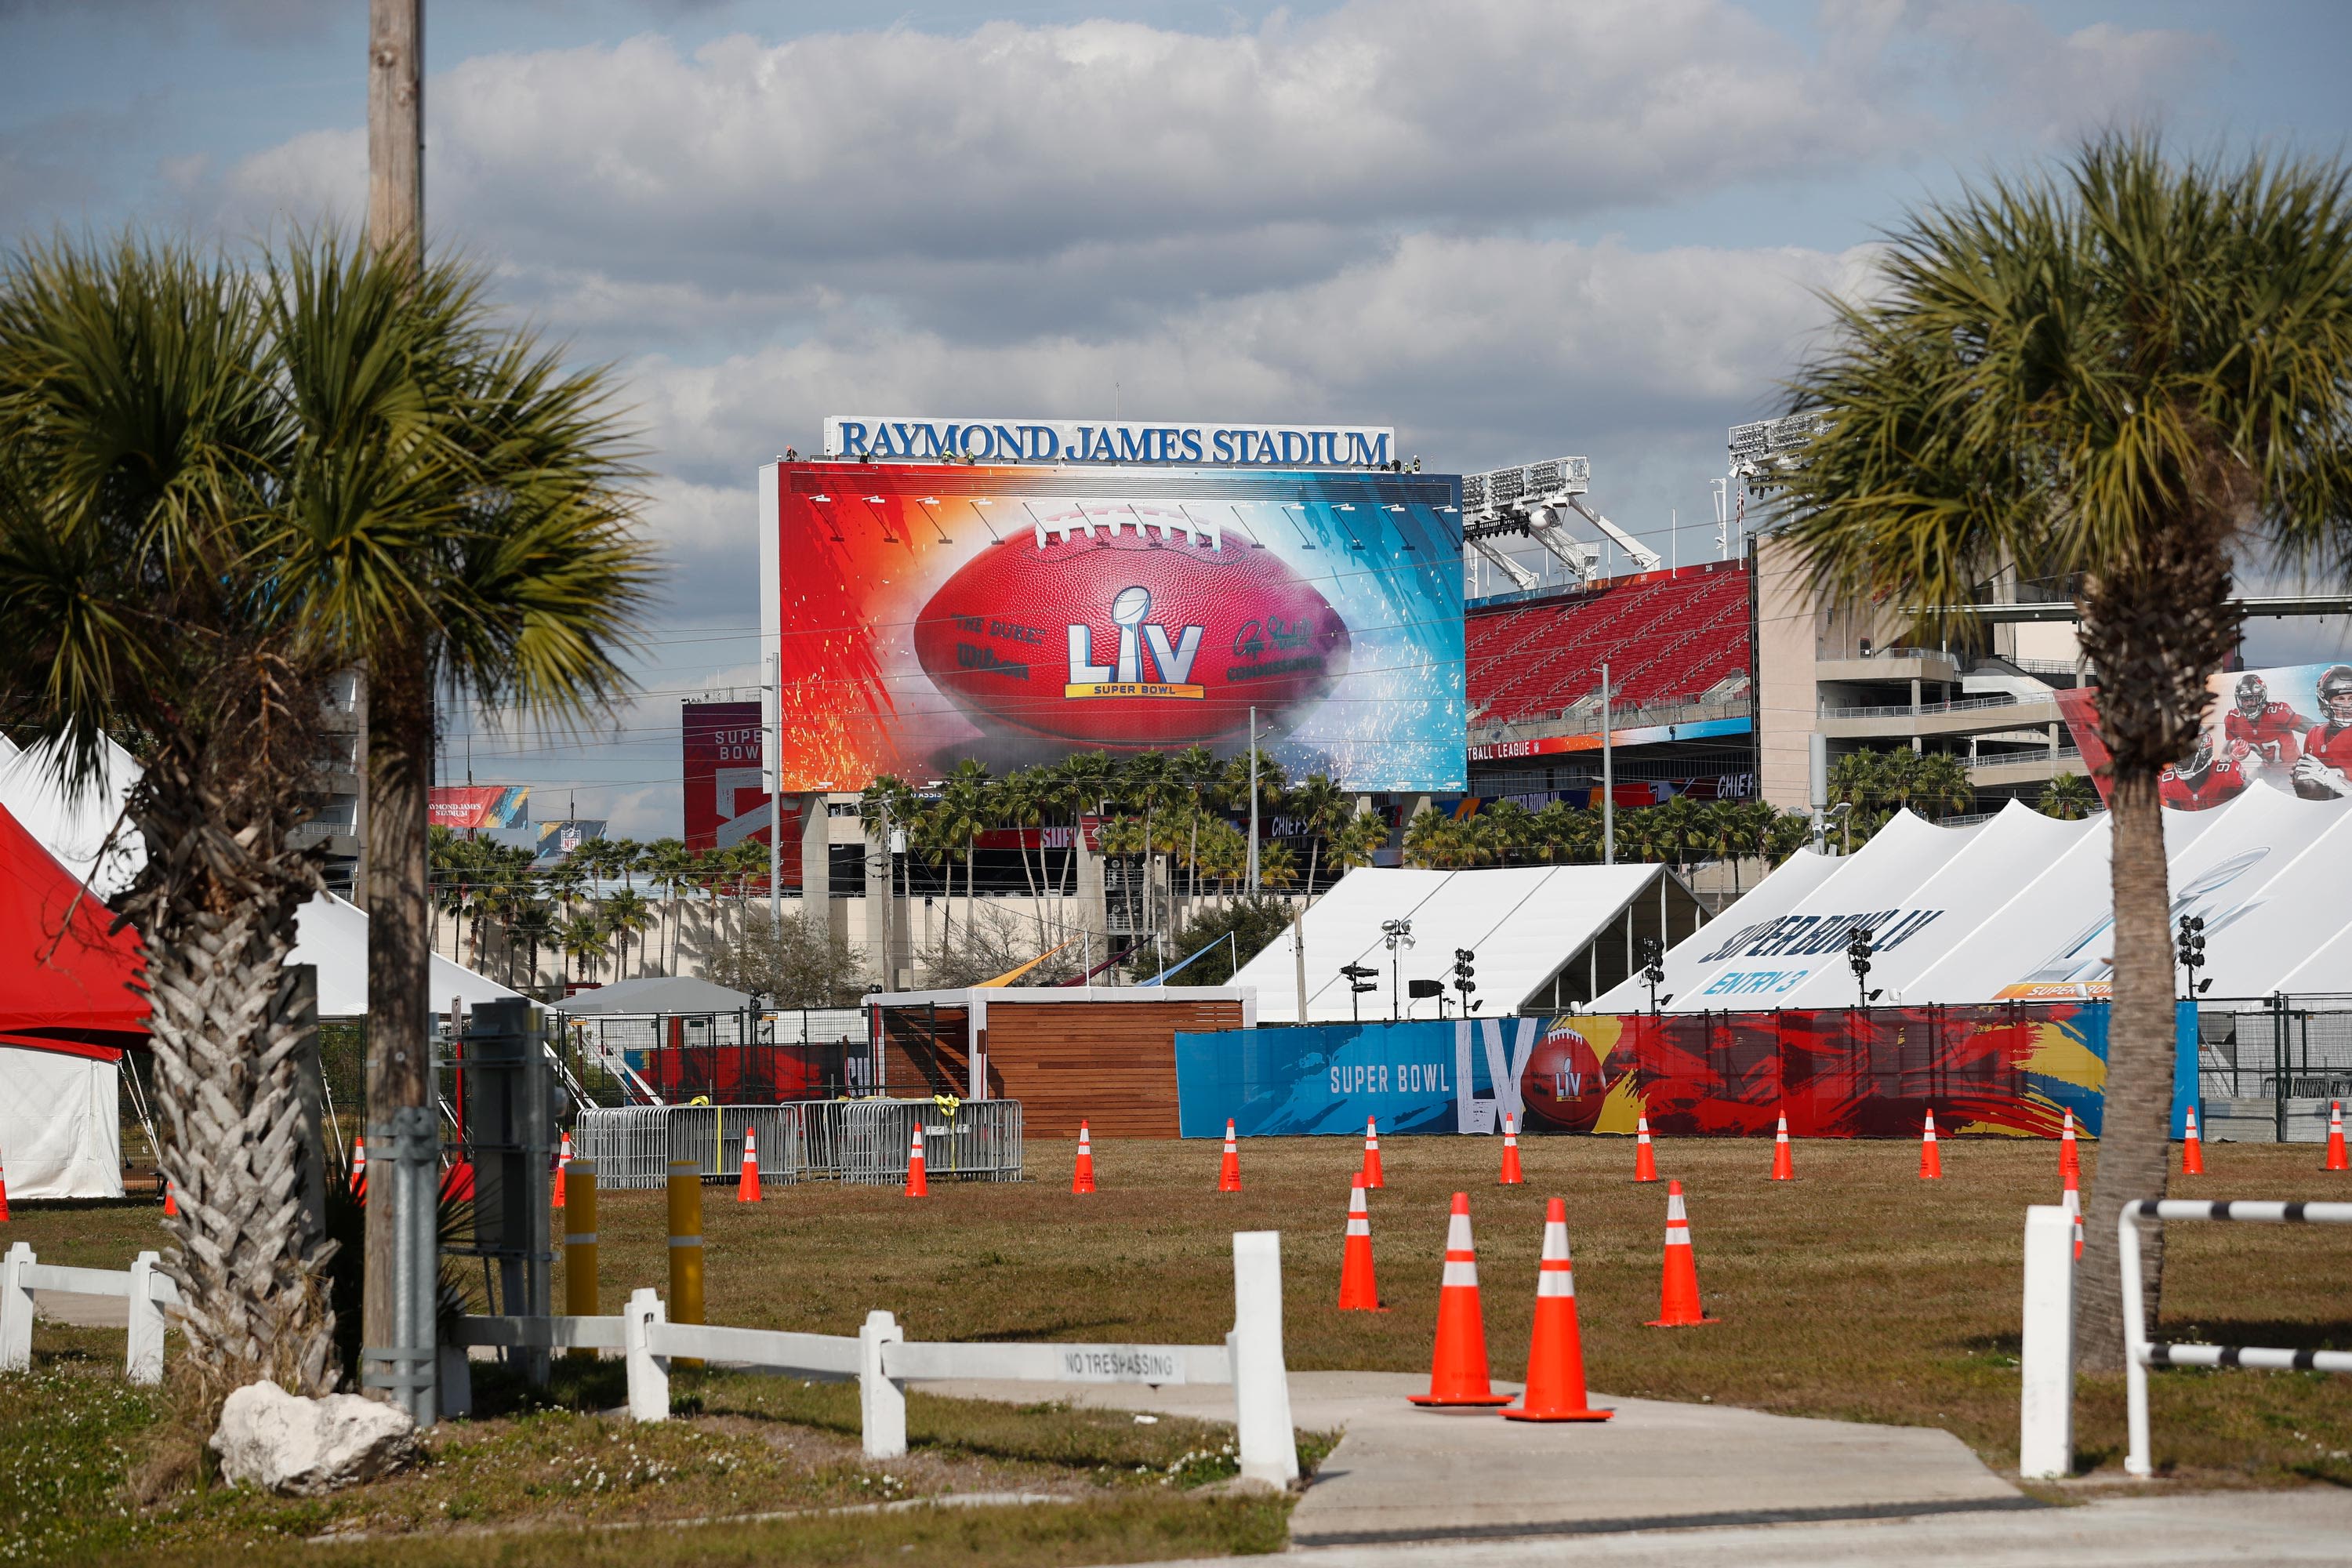 How to watch the Super Bowl live: Start time, channels and other